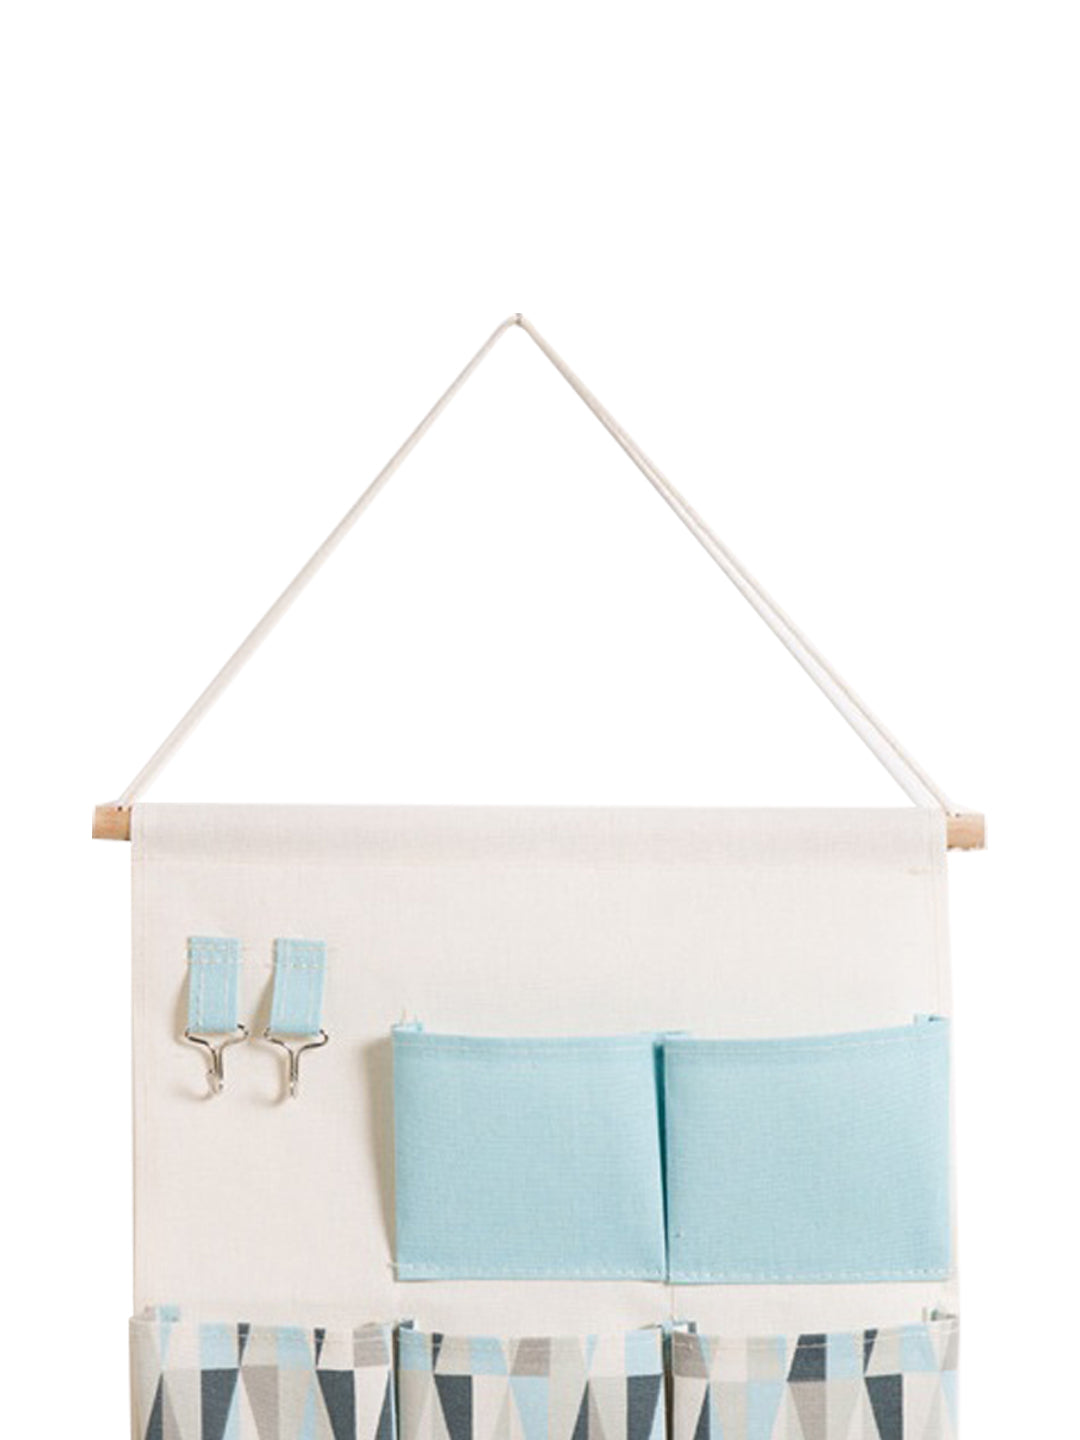 VON CASA Wall Hanging Storage Bag With 7 Pockets And Key Hook - Blue